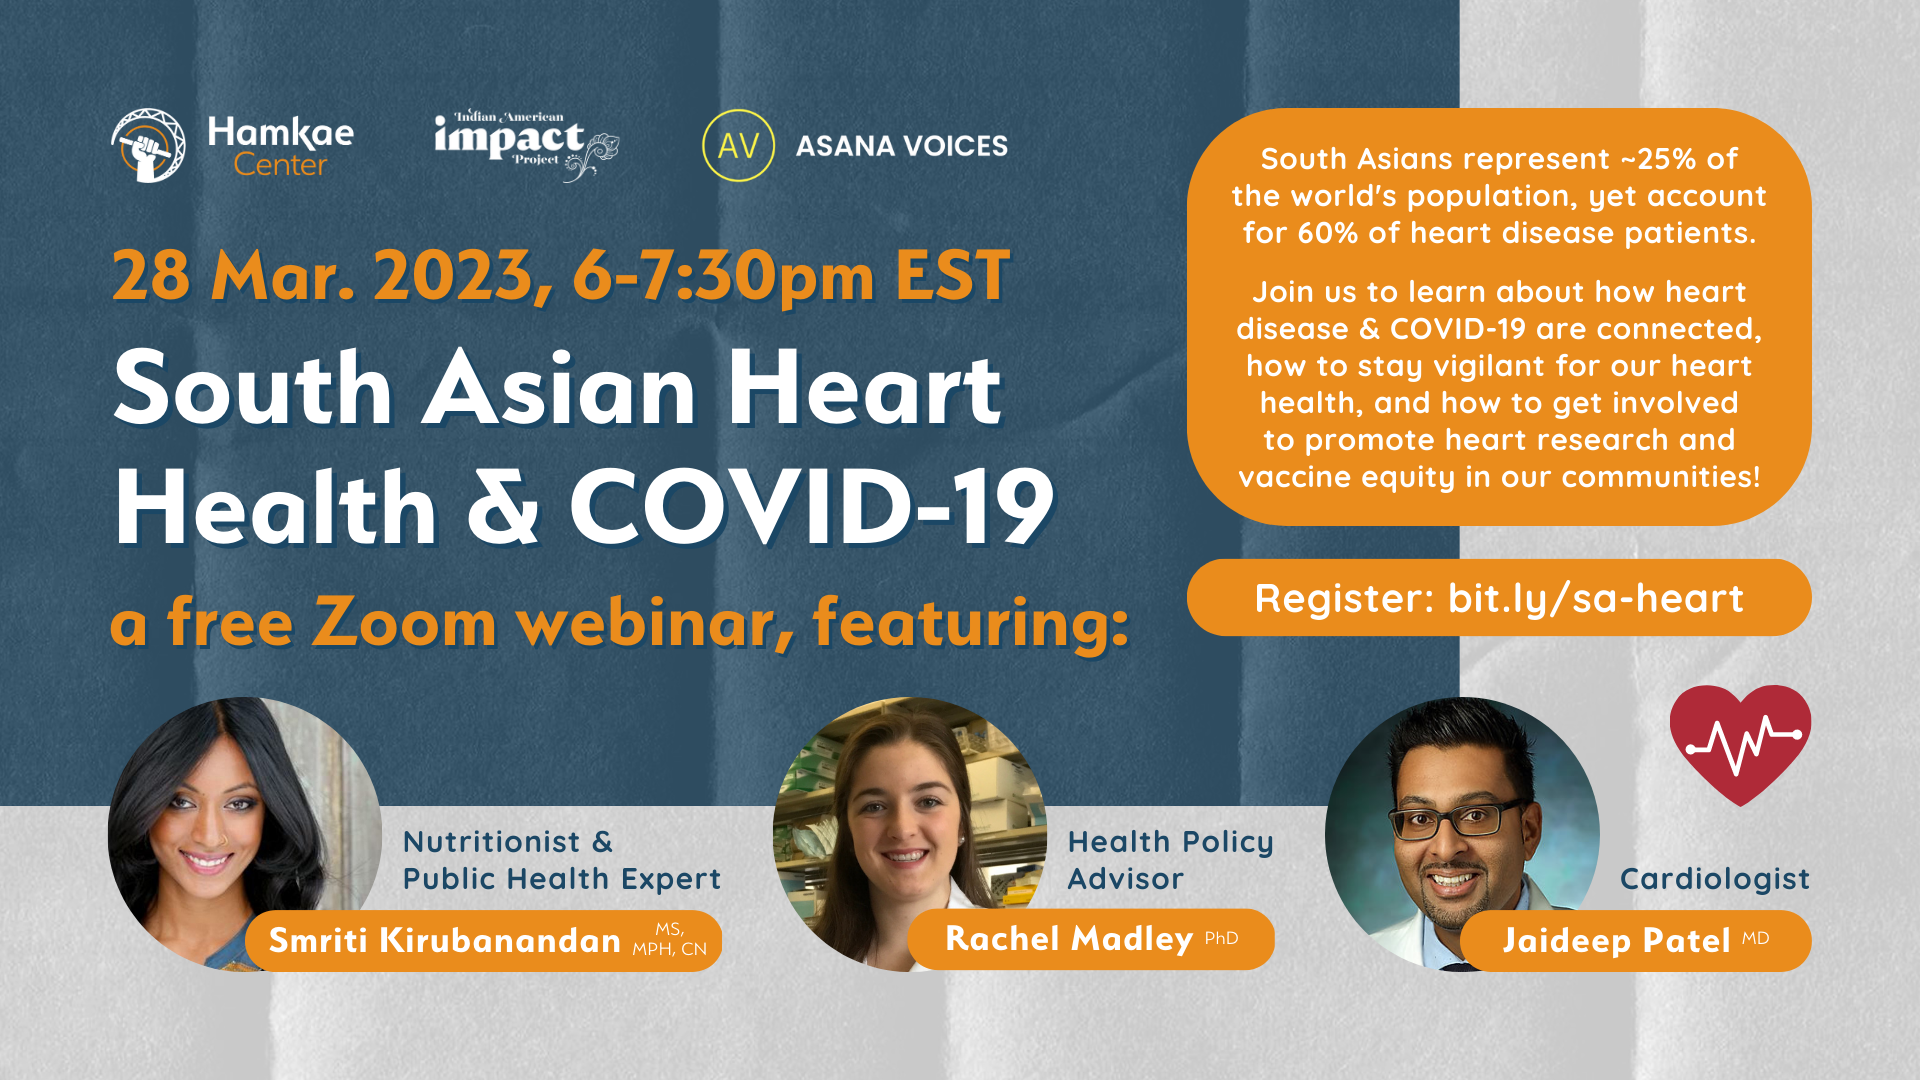 28 Mar. 2023, 6-7:30pm EST. South Asian Heart Health & COVID-19 A free Zoom webinar, featuring: - Simi Kirubanandan, MS, MPH, CN; Nutritionist - Rachel Madley, PhD; Health Policy Advisor - Jaideep Patel, MD; Cardiologist South Asians represent ~25% of the world's population, yet account for 60% of heart disease patients. Join us to learn about how heart disease & COVID-19 are connected, how to stay vigilant for our heart health, and how to get involved to promote heart research and vaccine equity in our communities! Register: bit.ly/sa-heart Hosted by Hamkae Center, Indian American Impact, ASANA Voices